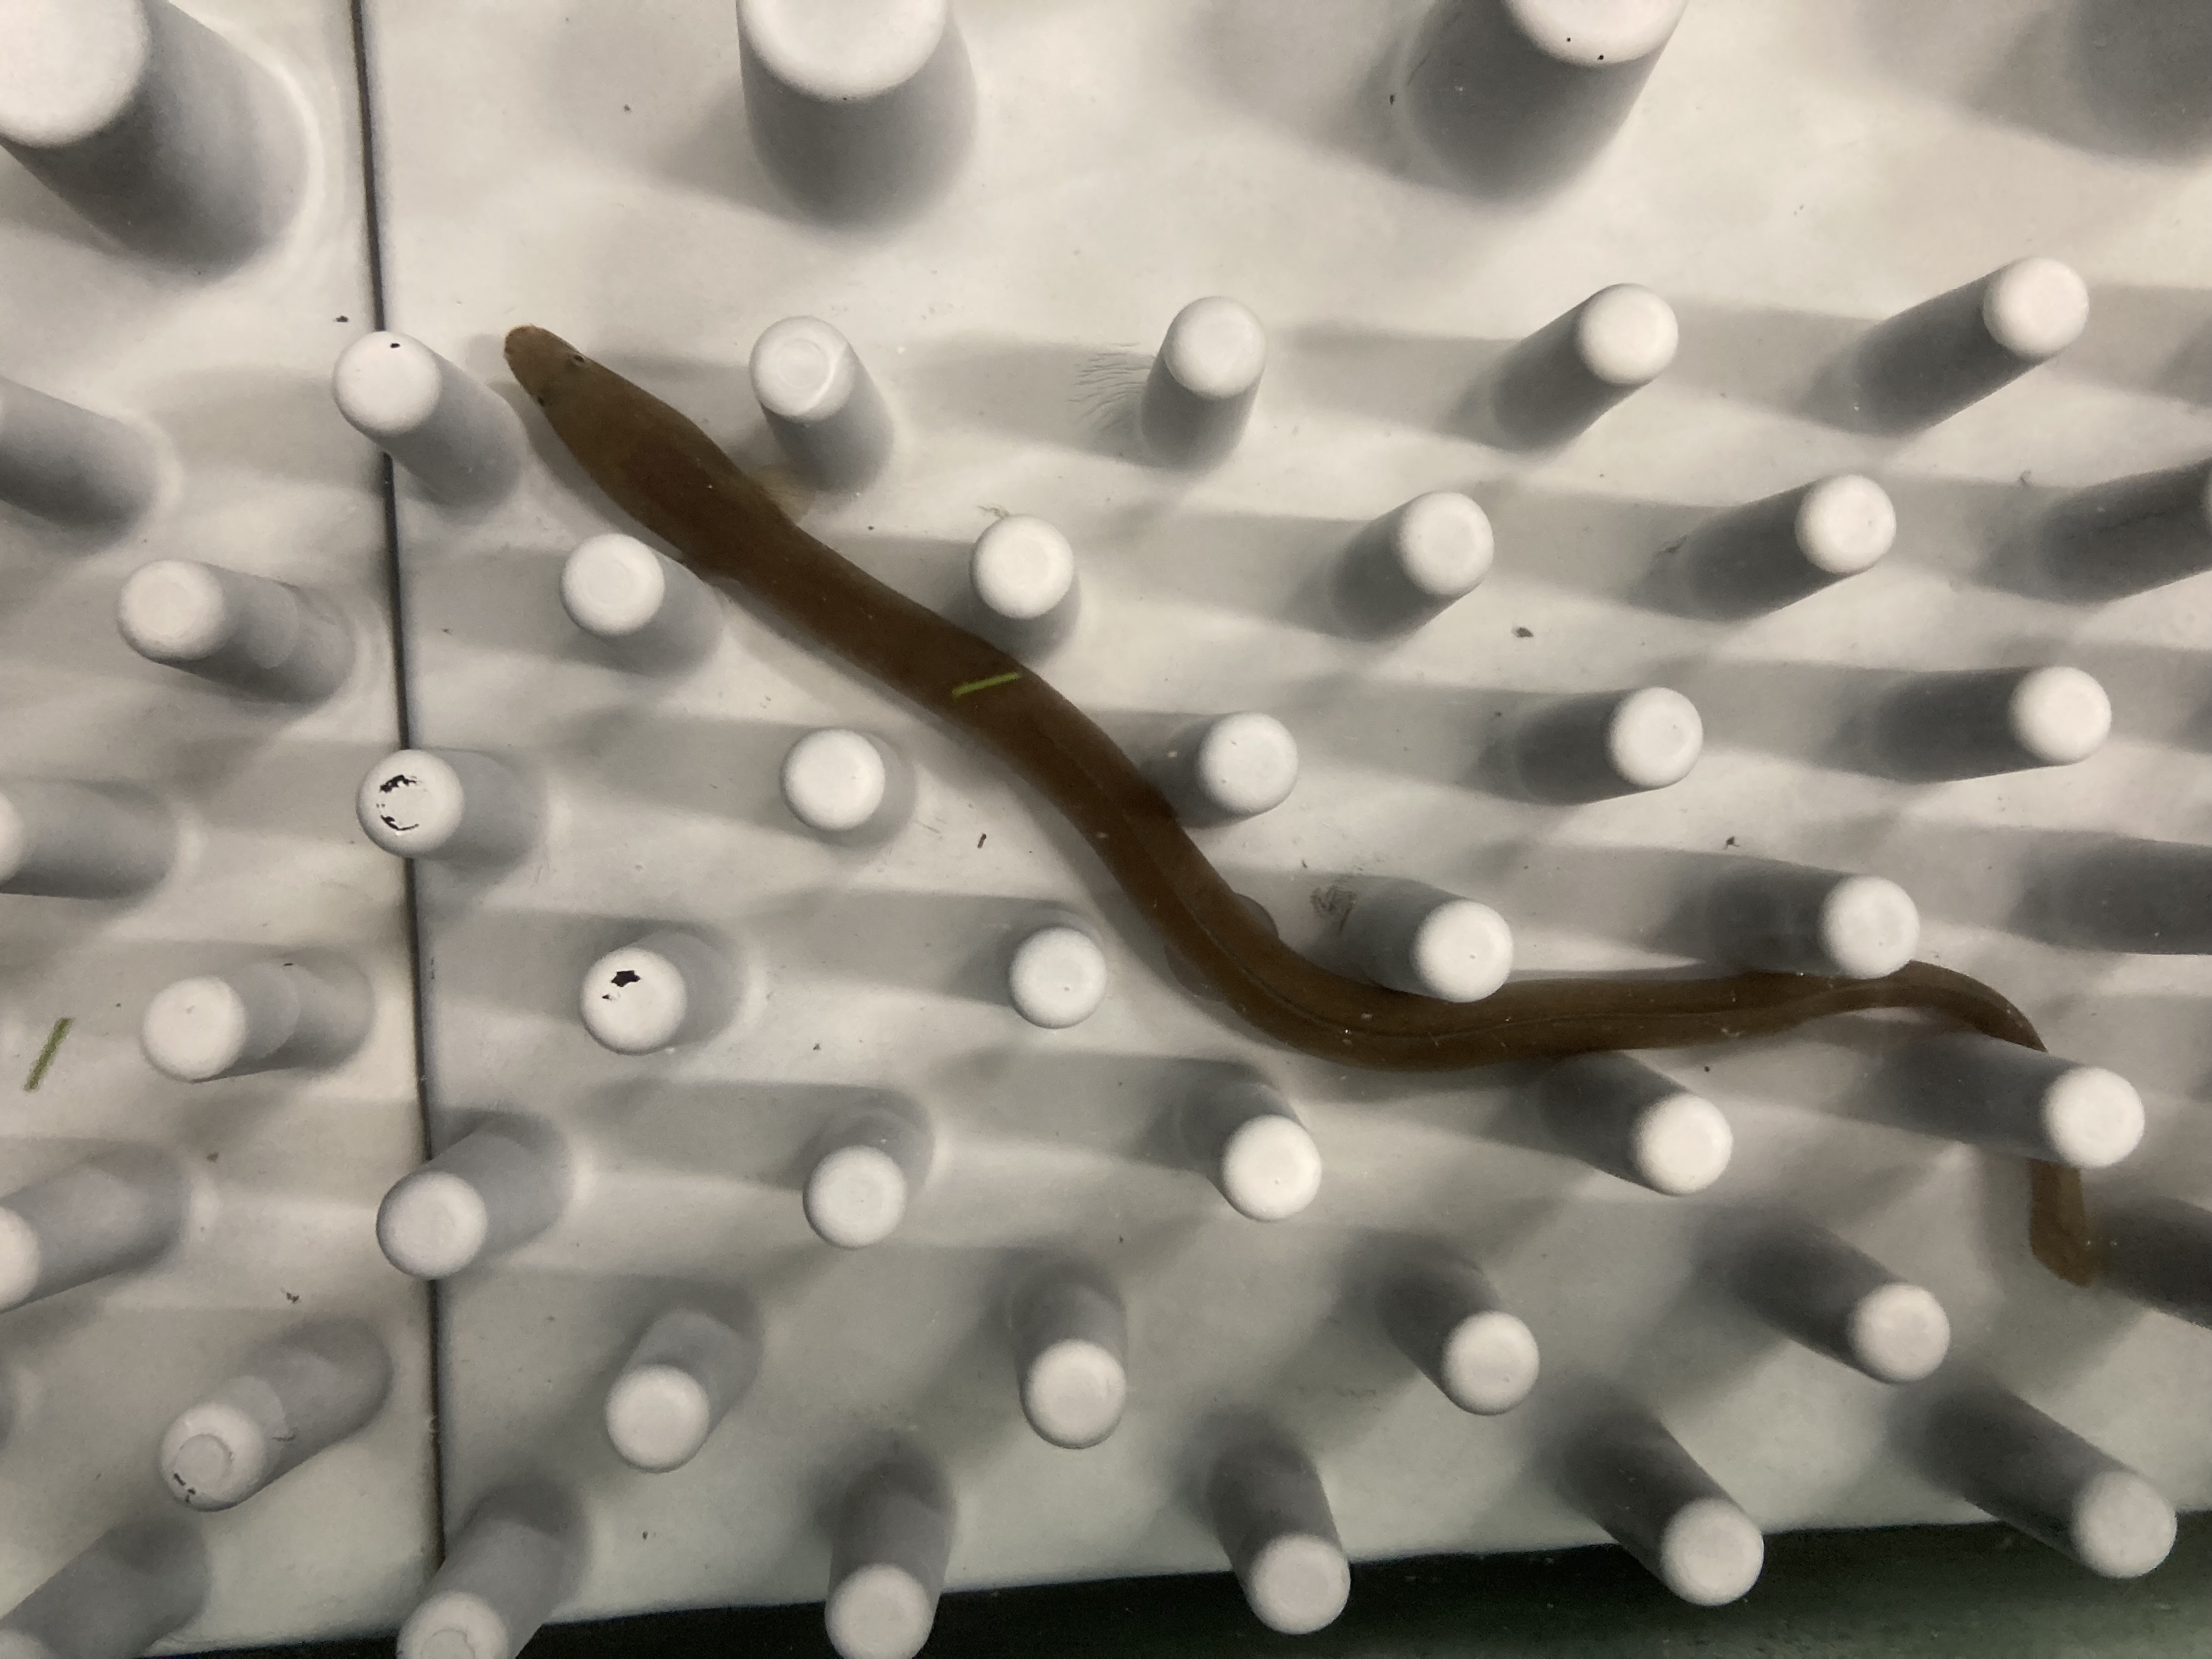 Eel tiles being tested in the lab